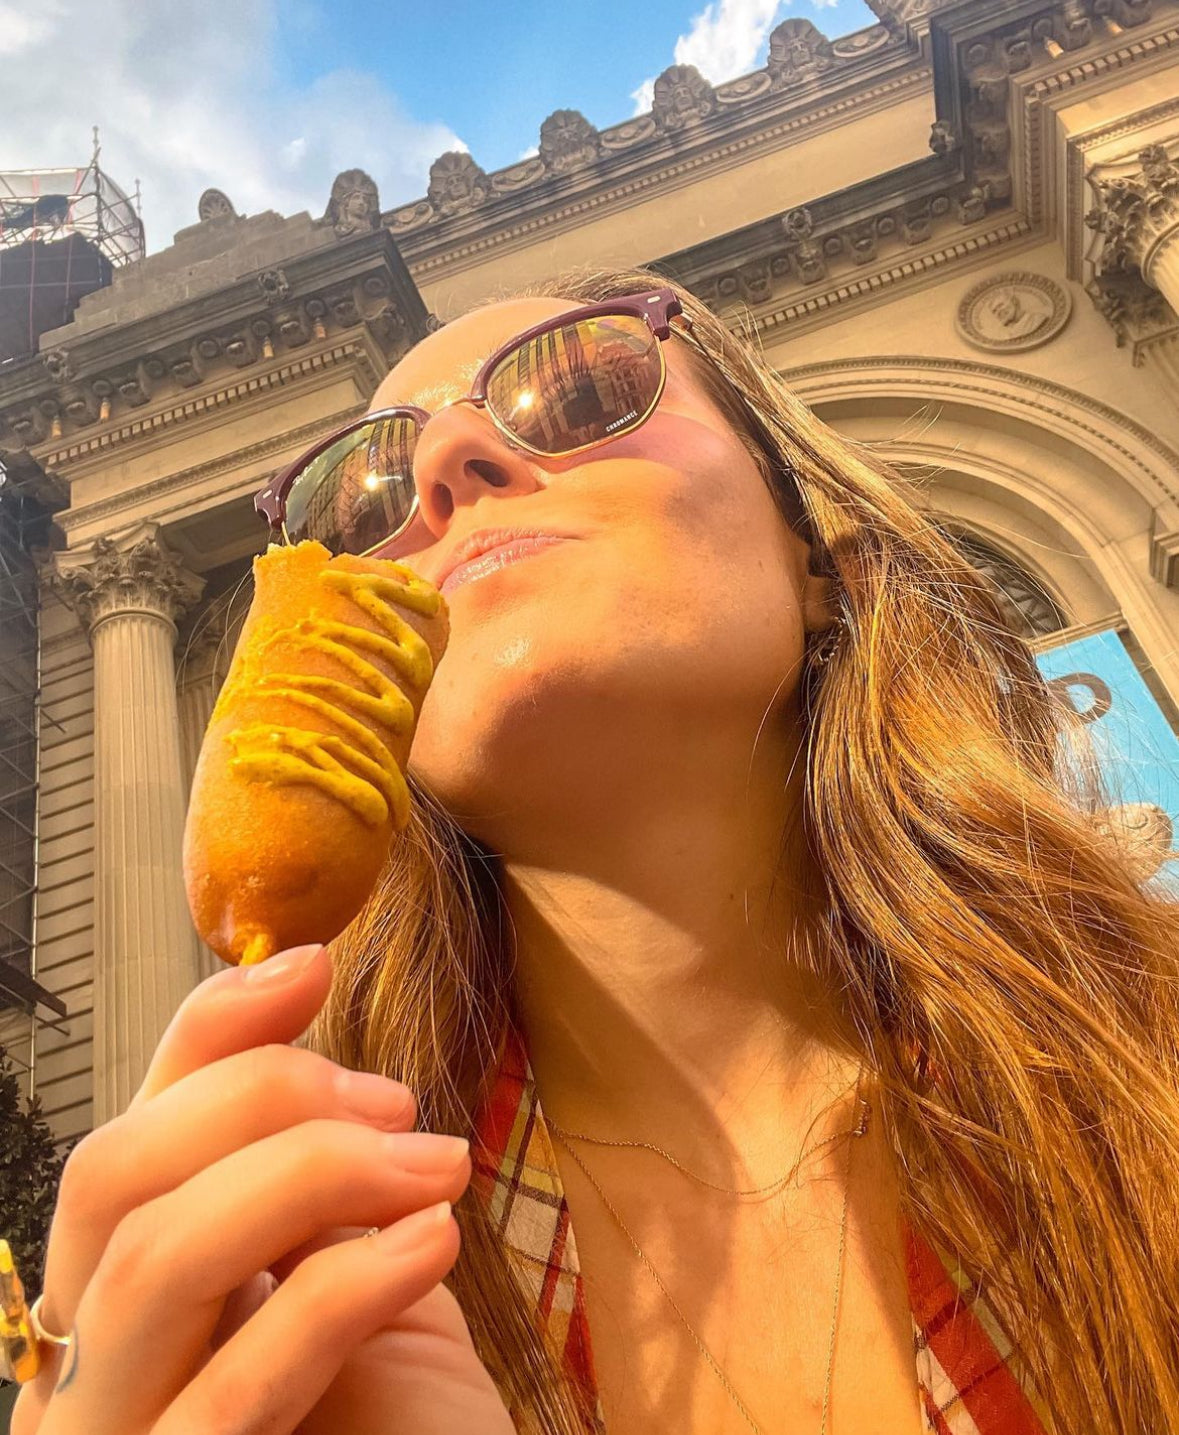 Elegant woman wearing luxurious fine jewelry from Always, A. eating a corndog in the streets of NYC